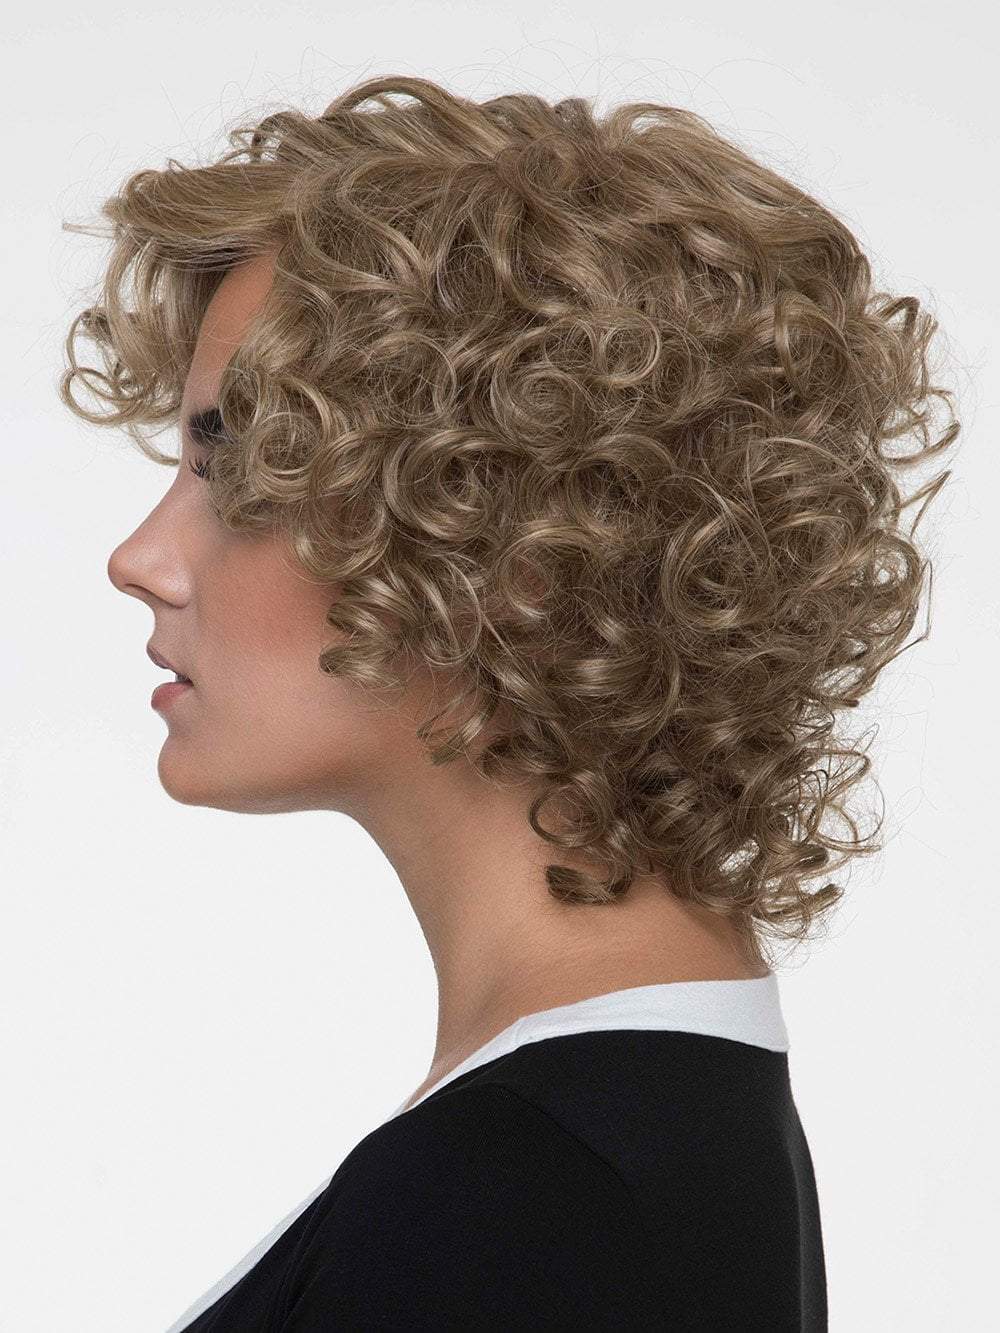 A bouncy, curly style any woman would die for